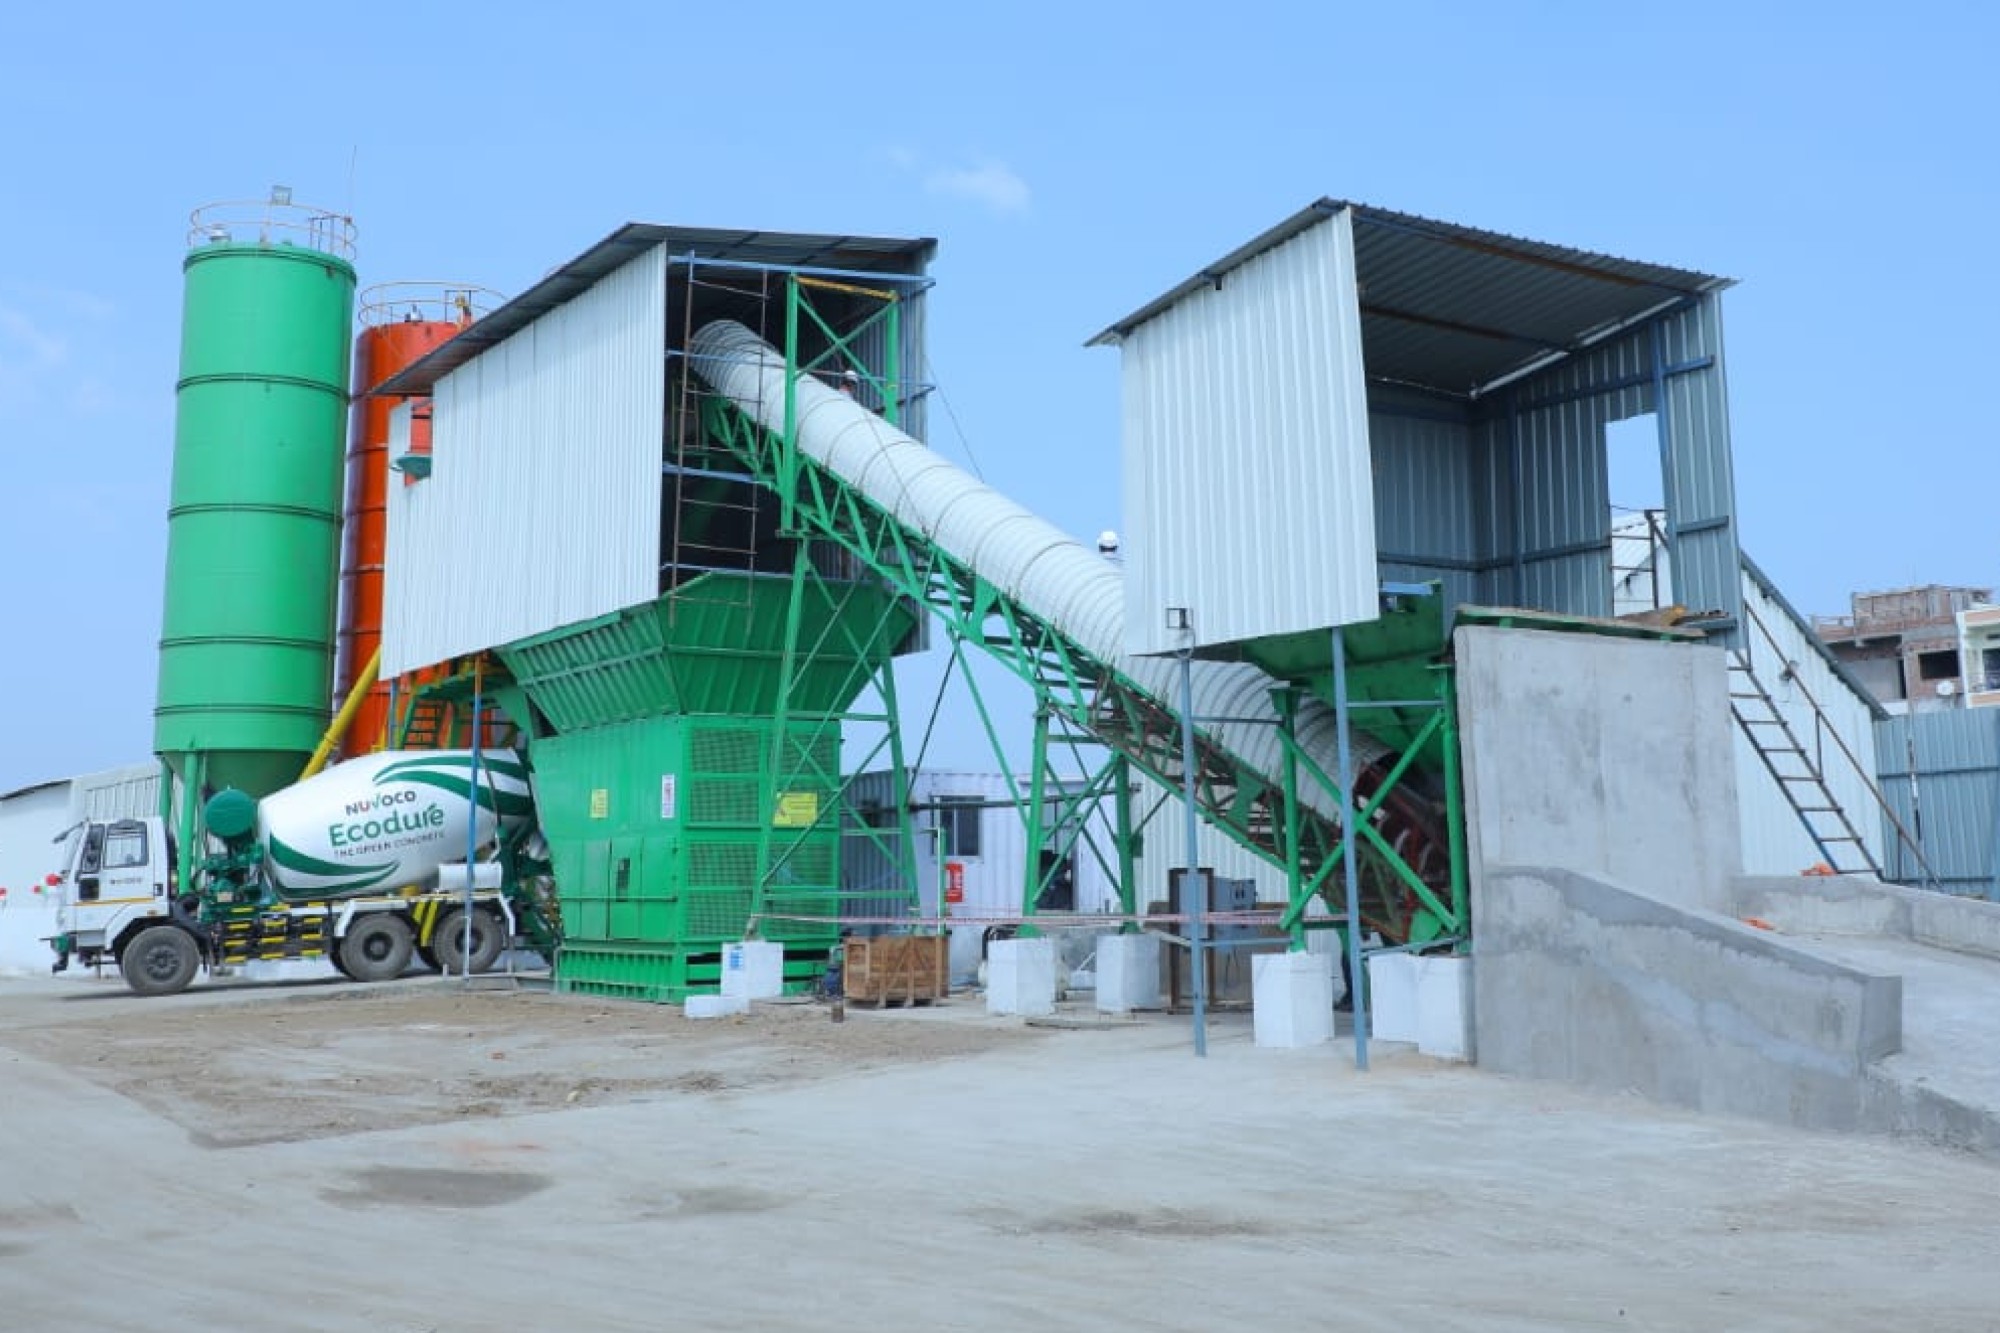 Nuvoco Vistas Corp. Ltd., ranked as India’s fifth-largest cement group, has recently expanded its operational reach by inaugurating its second cutting-edge Ready-mix Concrete Plant (RMX) named Patna-II.